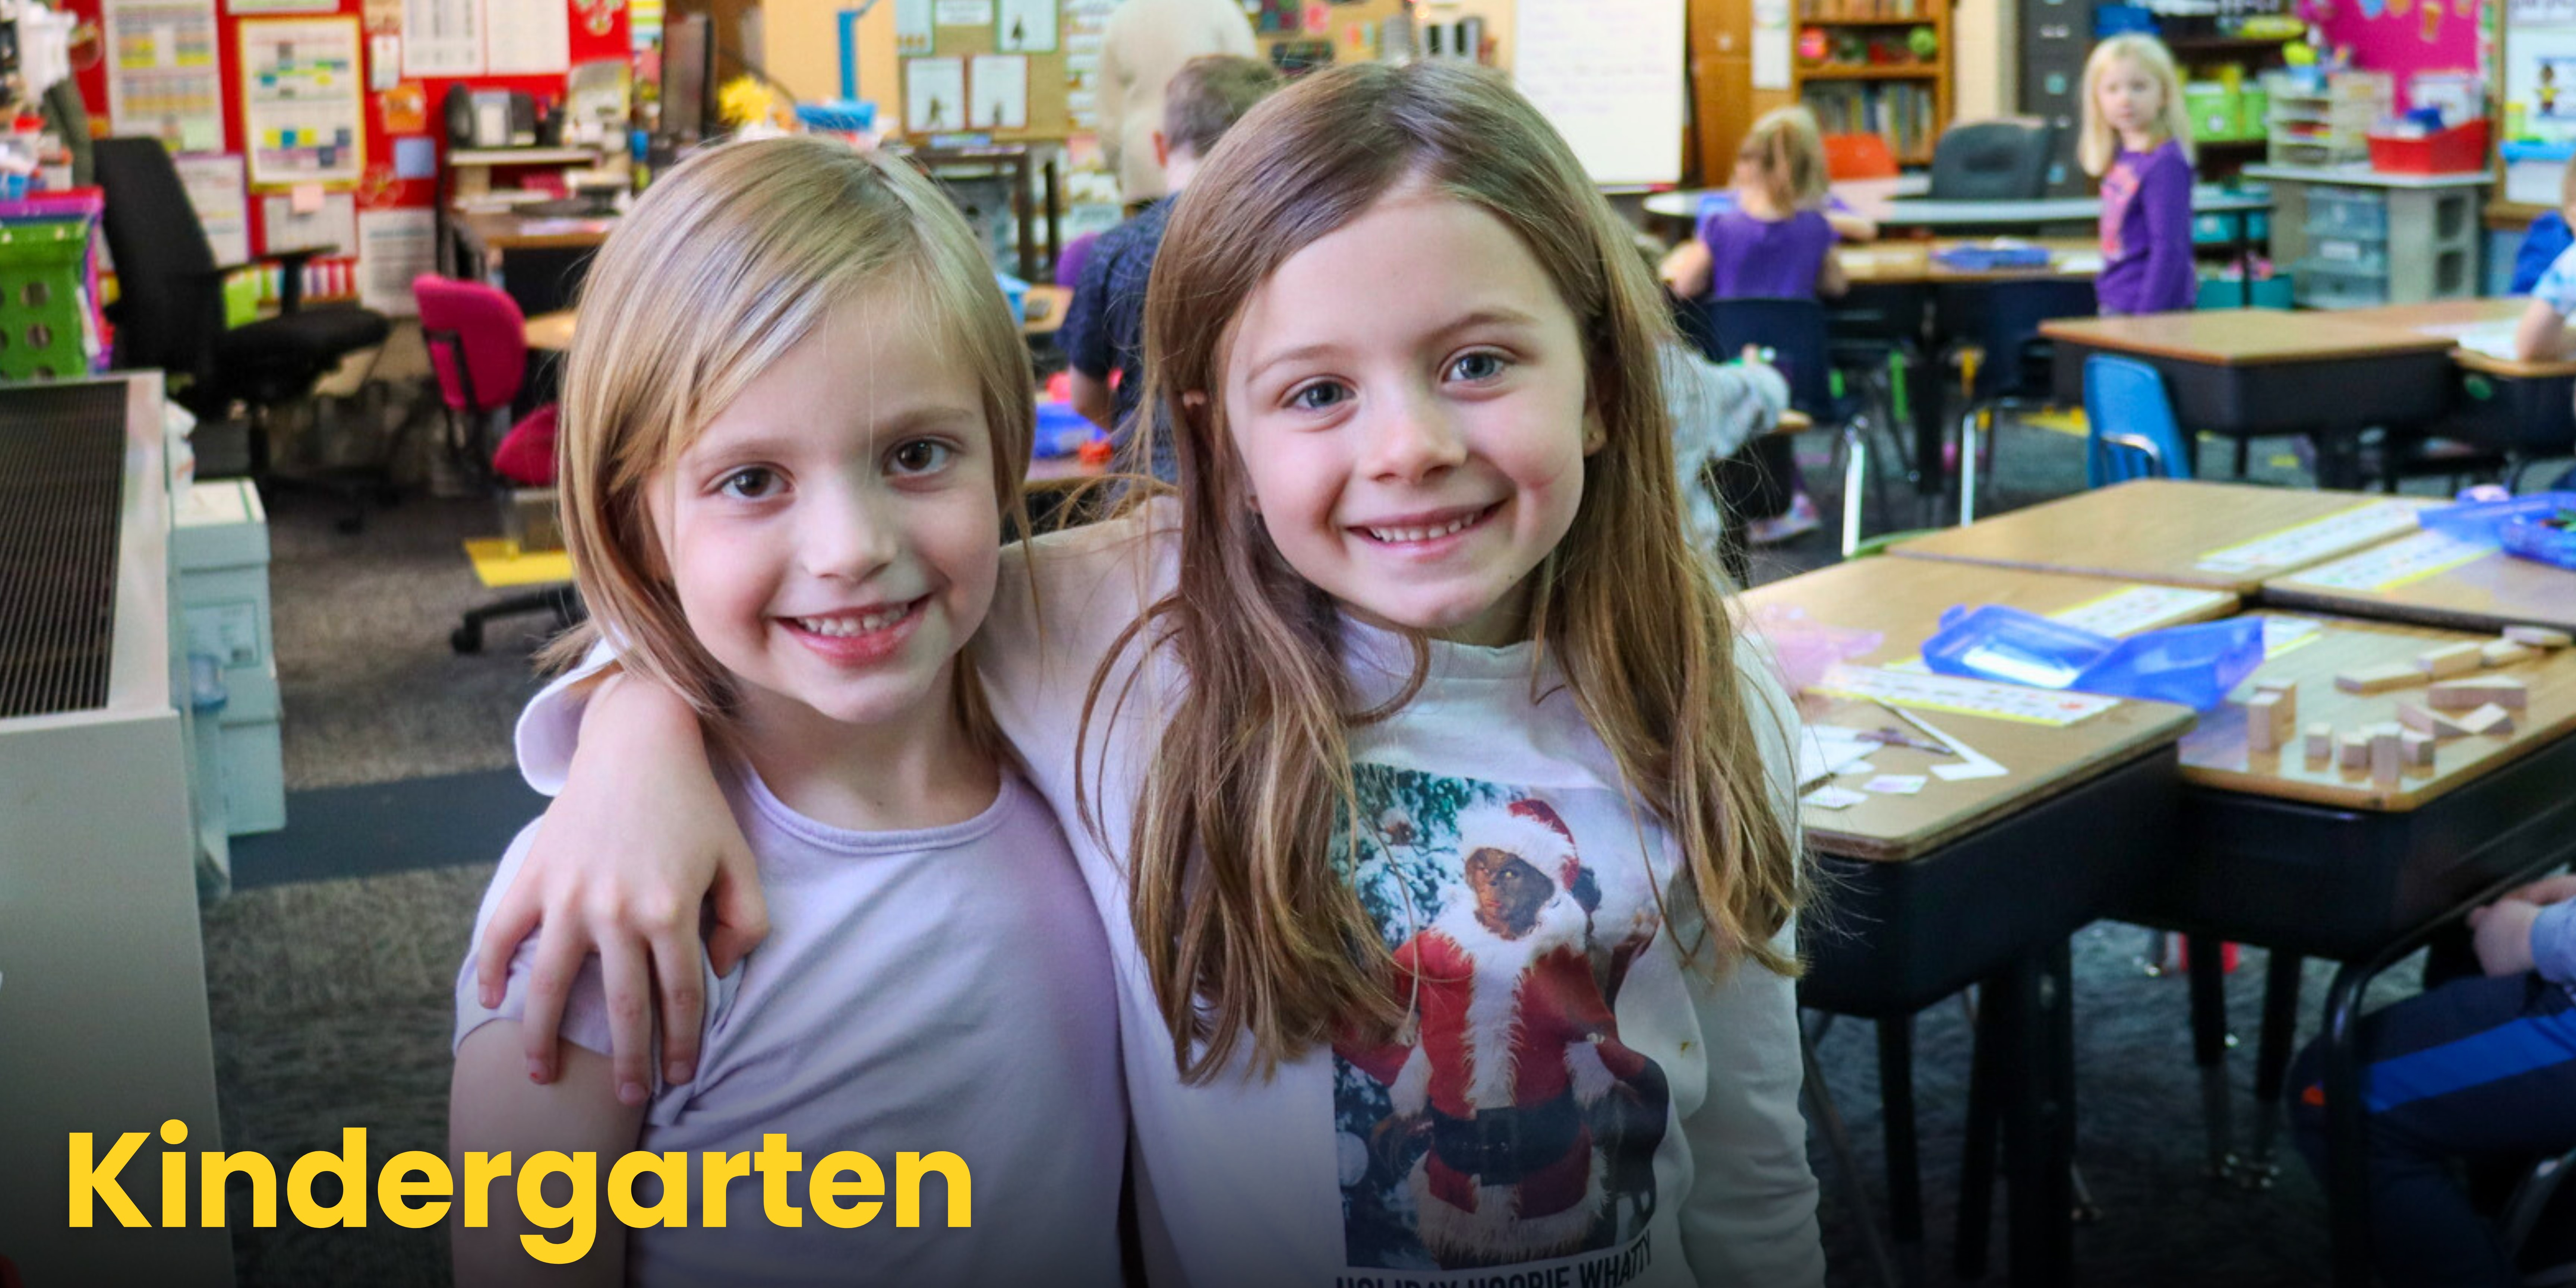 Kindergarten graphic with close-up portrait of smiling students